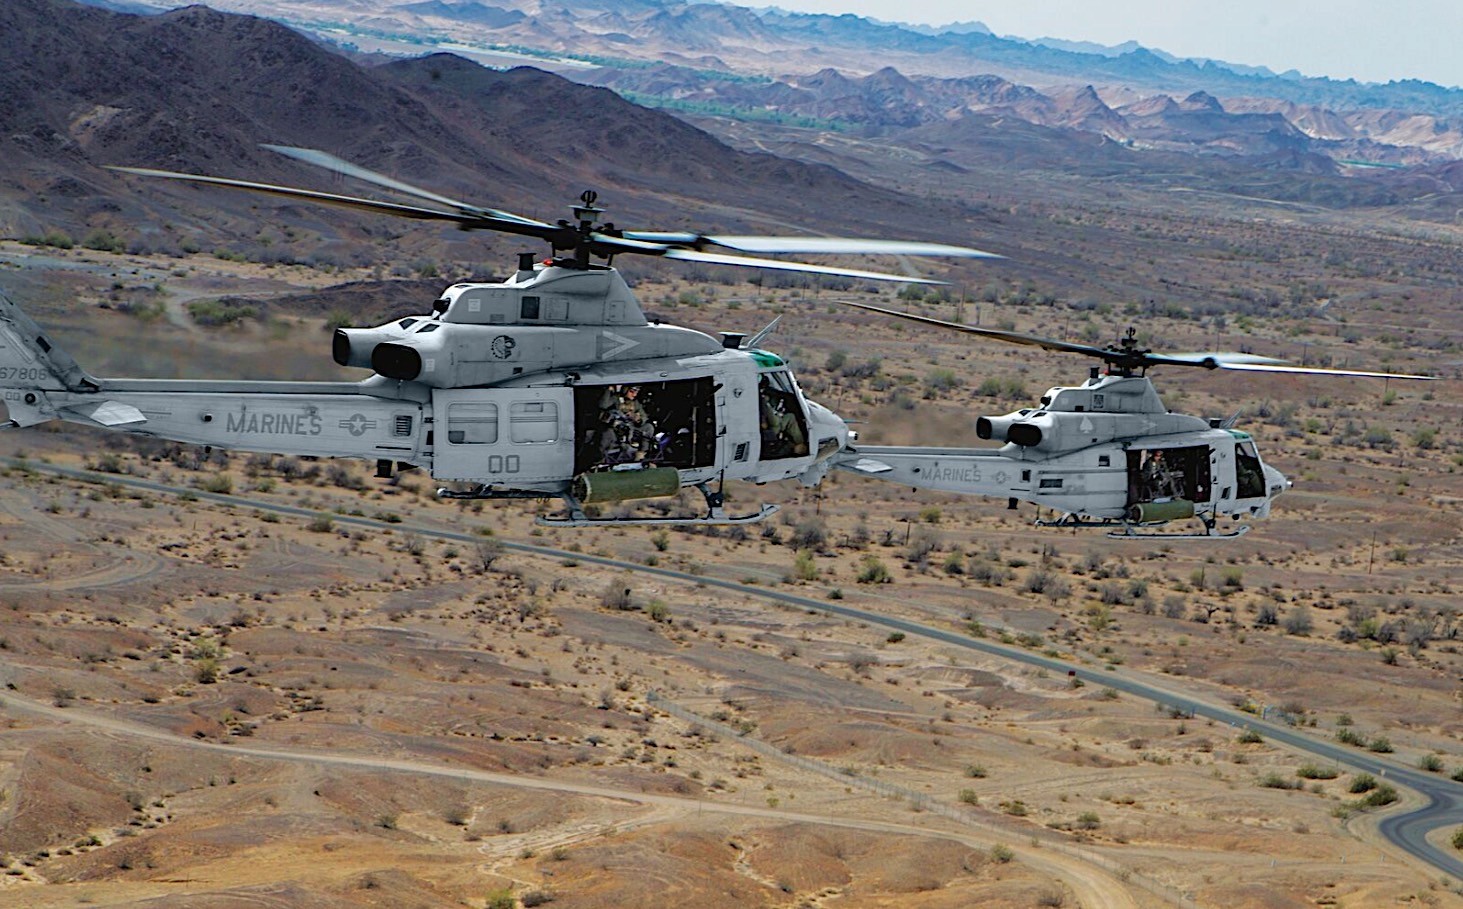 Bell's Helicopter Dominance Viper, Venom, and Upgrades